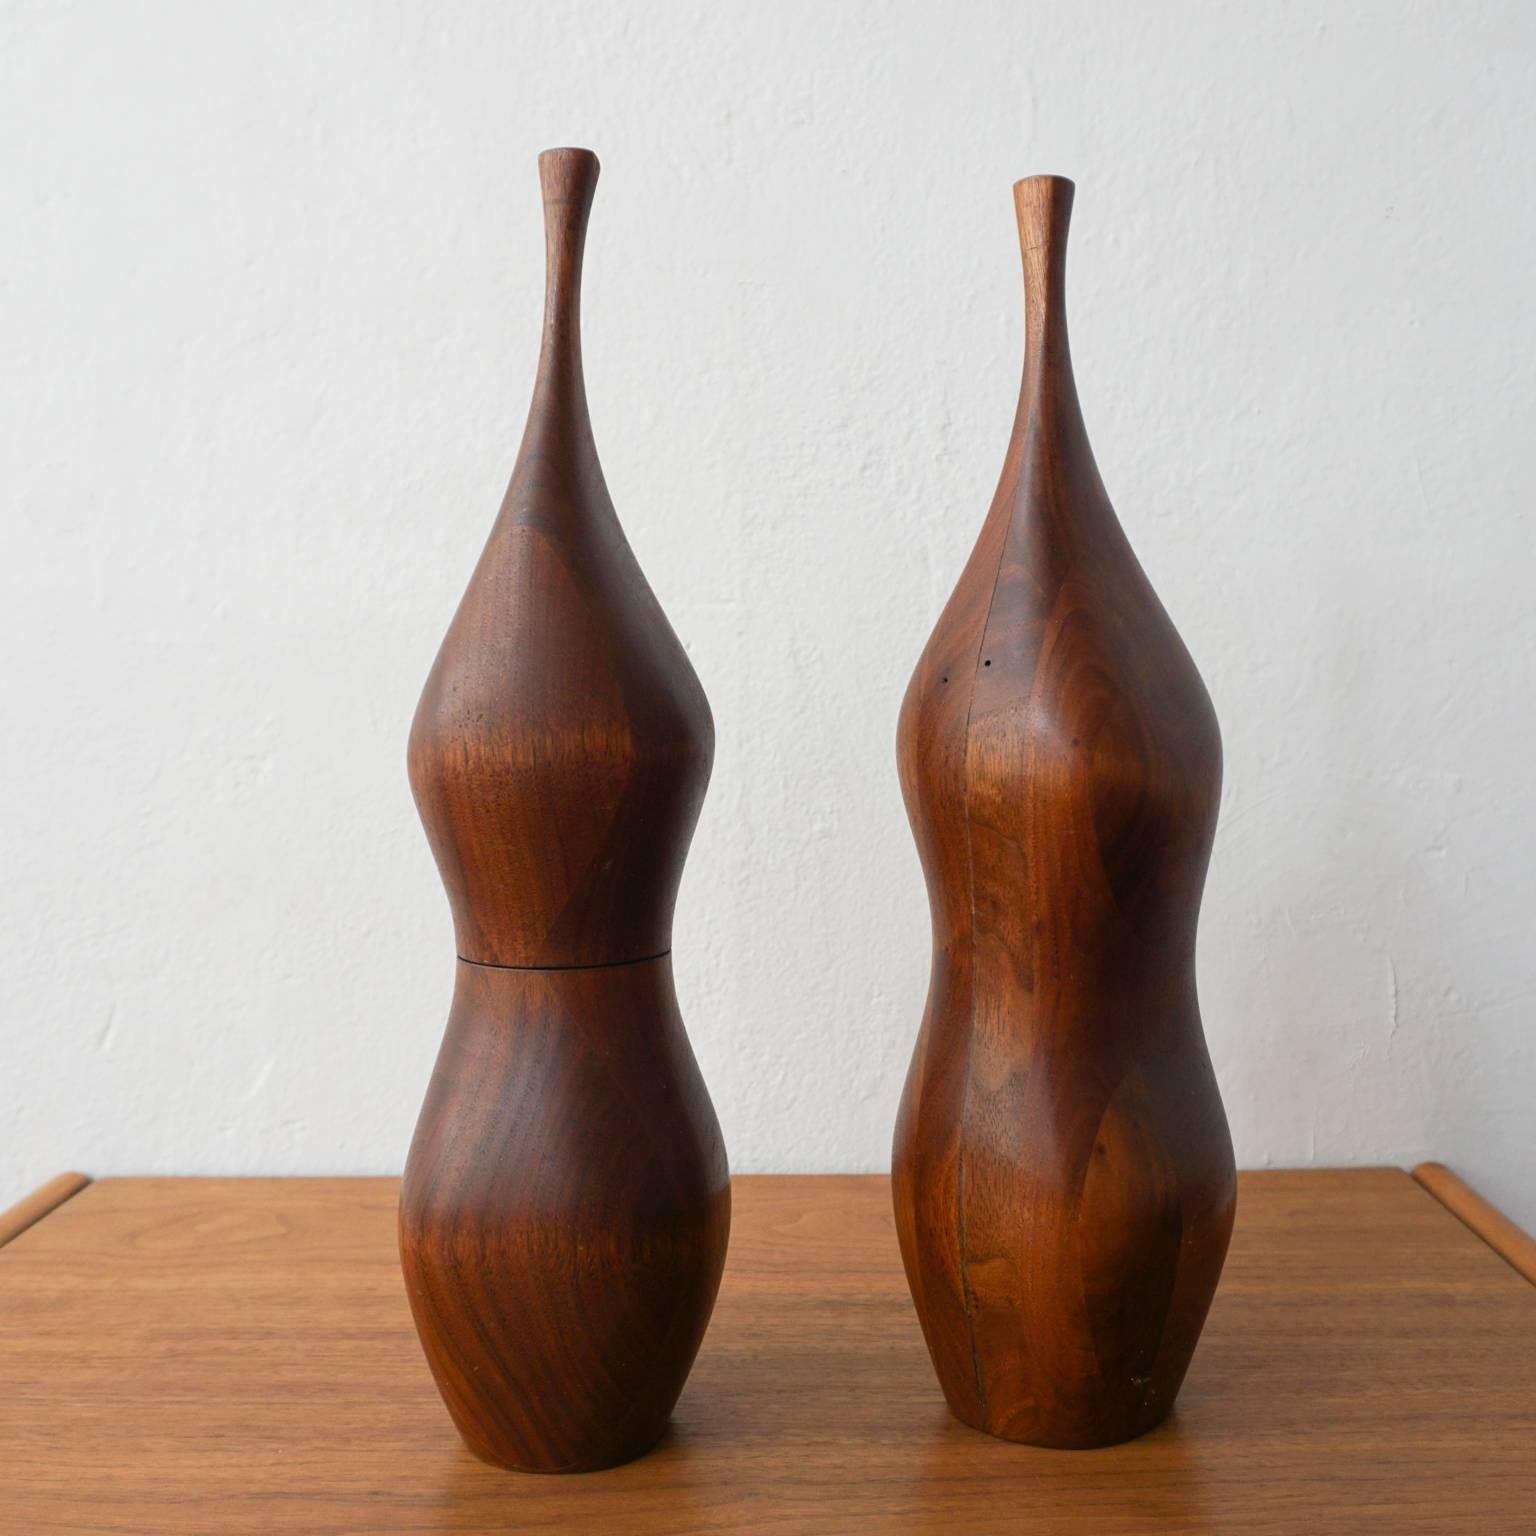 Organic Modern Handcrafted Peppermill and Salt Shaker by Daniel Loomis Valenza For Sale